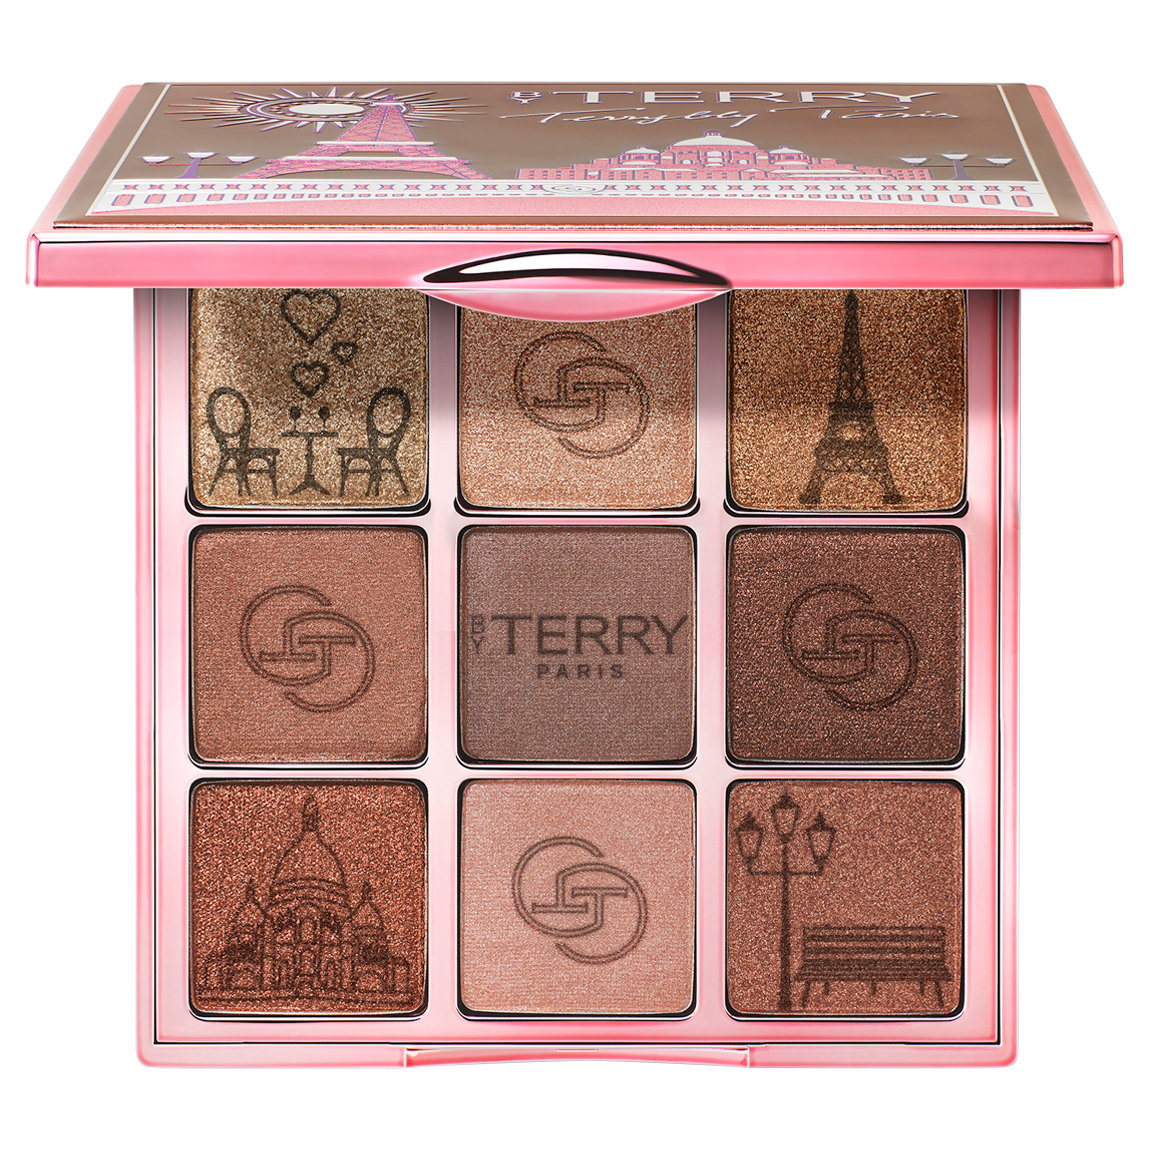 BY TERRY V.I.P Expert Palette - Bonjour Paris alternative view 1 - product swatch.